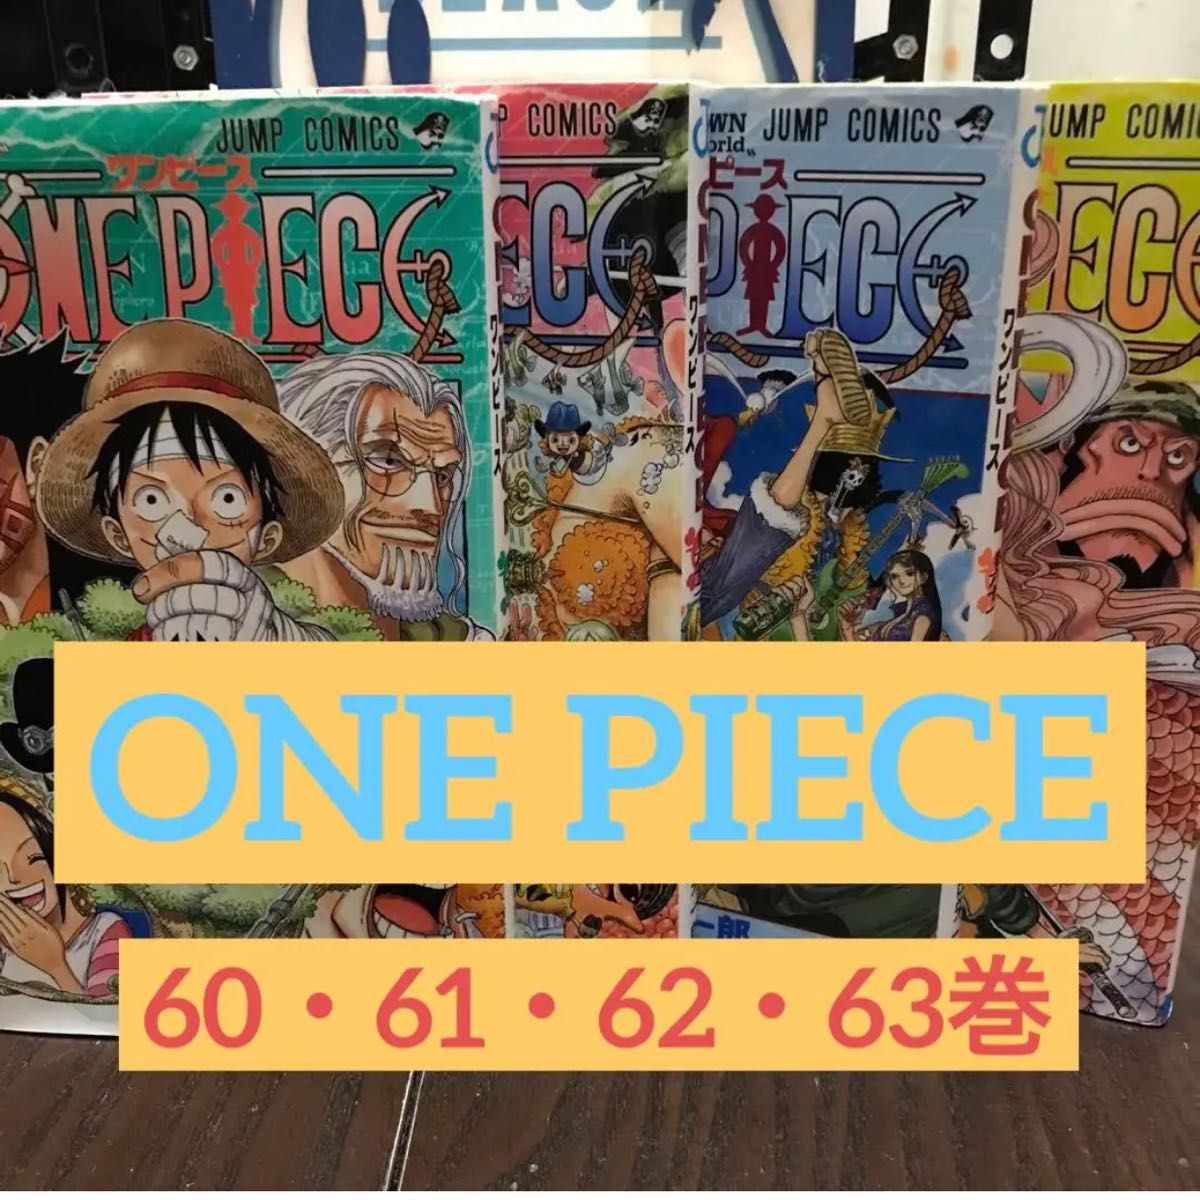 ONE PIECE 漫画　尾田栄一郎　　ワンピース60〜63巻　4冊セット　コミック　少年ジャンプ　集英社